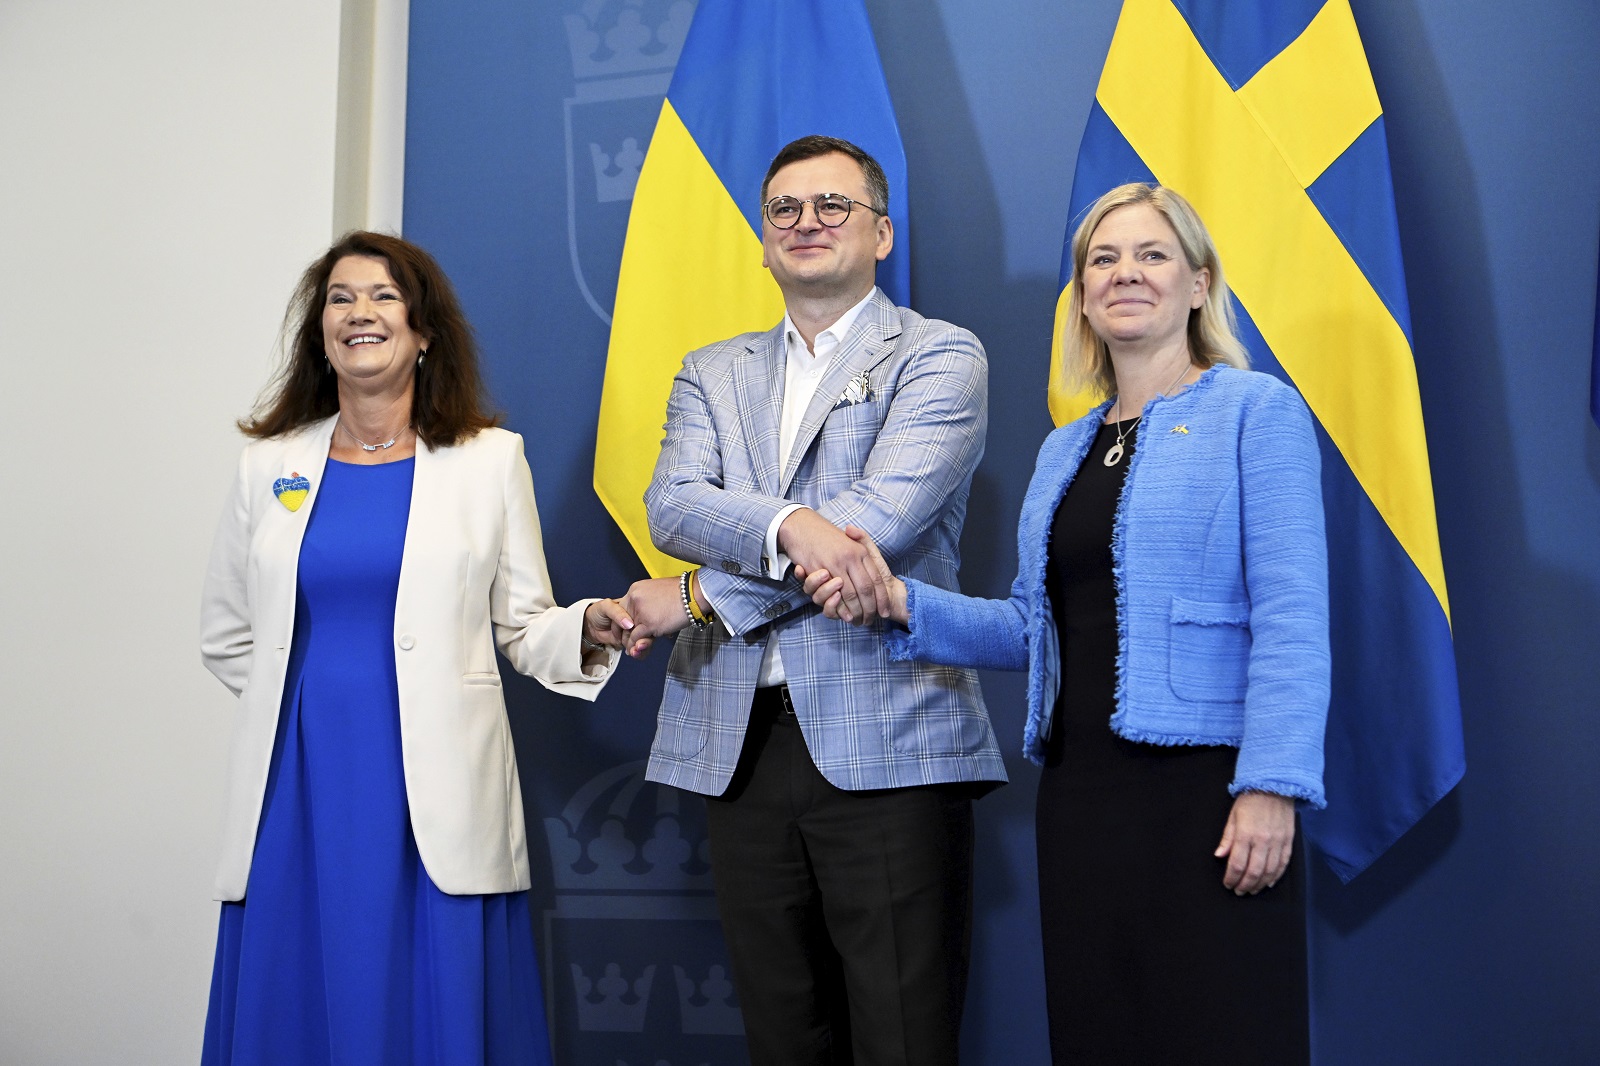 epa10144755 (L-R) Sweden's Foreign Minister Ann Linde, Ukraine's Foreign Minister Dmytro Kuleba, and Sweden's Prime Minister Magdalena Andersson pose for a photo prior to a meeting in Stockholm, Sweden, 29 August 2022.  EPA/JESSICA GOW  SWEDEN OUT